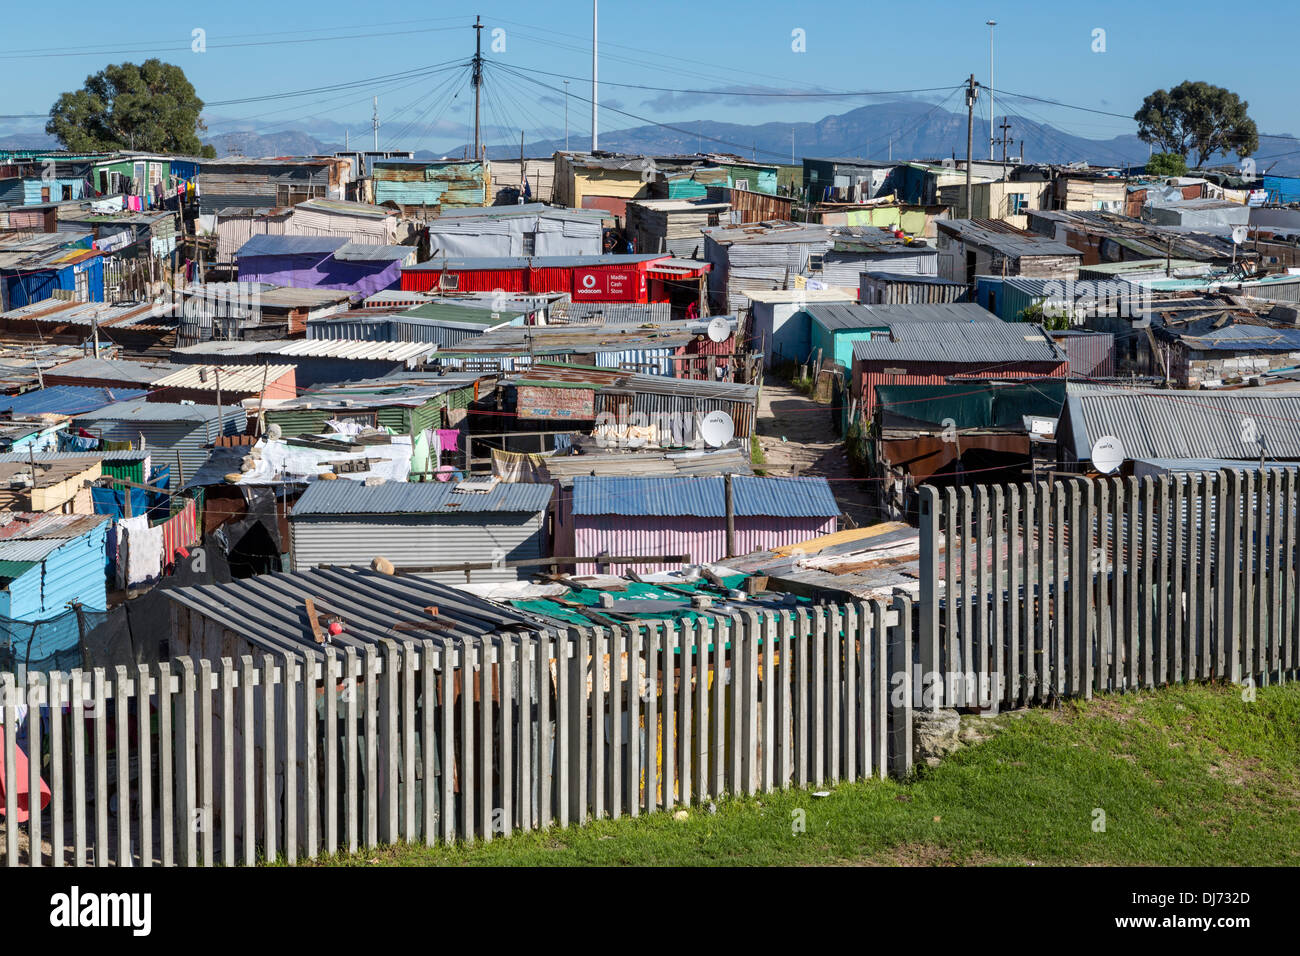 Khayelitsha Cape Town High Resolution Stock Photography and Images - Alamy